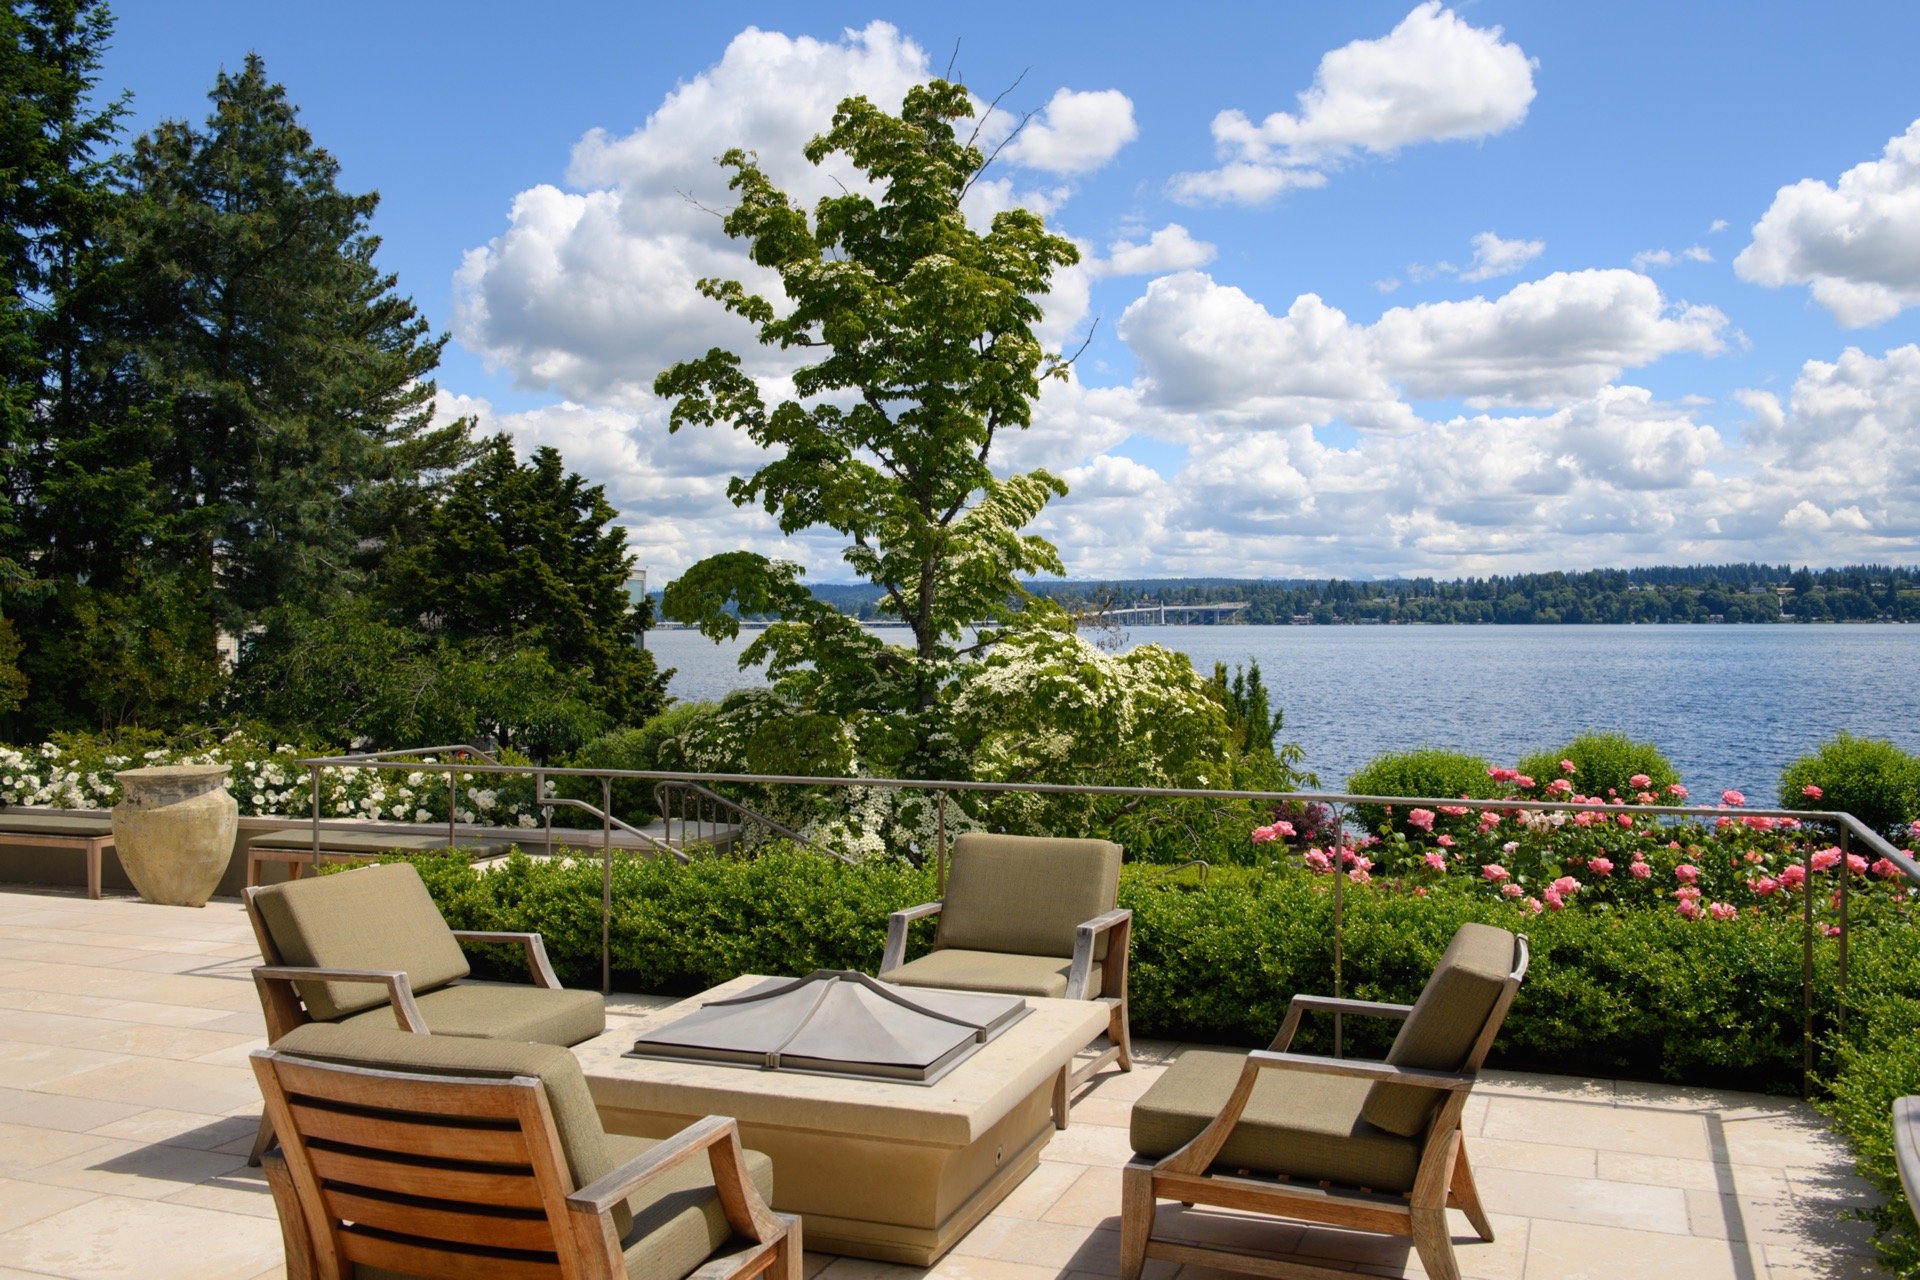 Francis York Waterfront Mansion in Seattle’s Exclusive Enclave, The Reed Estate 13.jpg